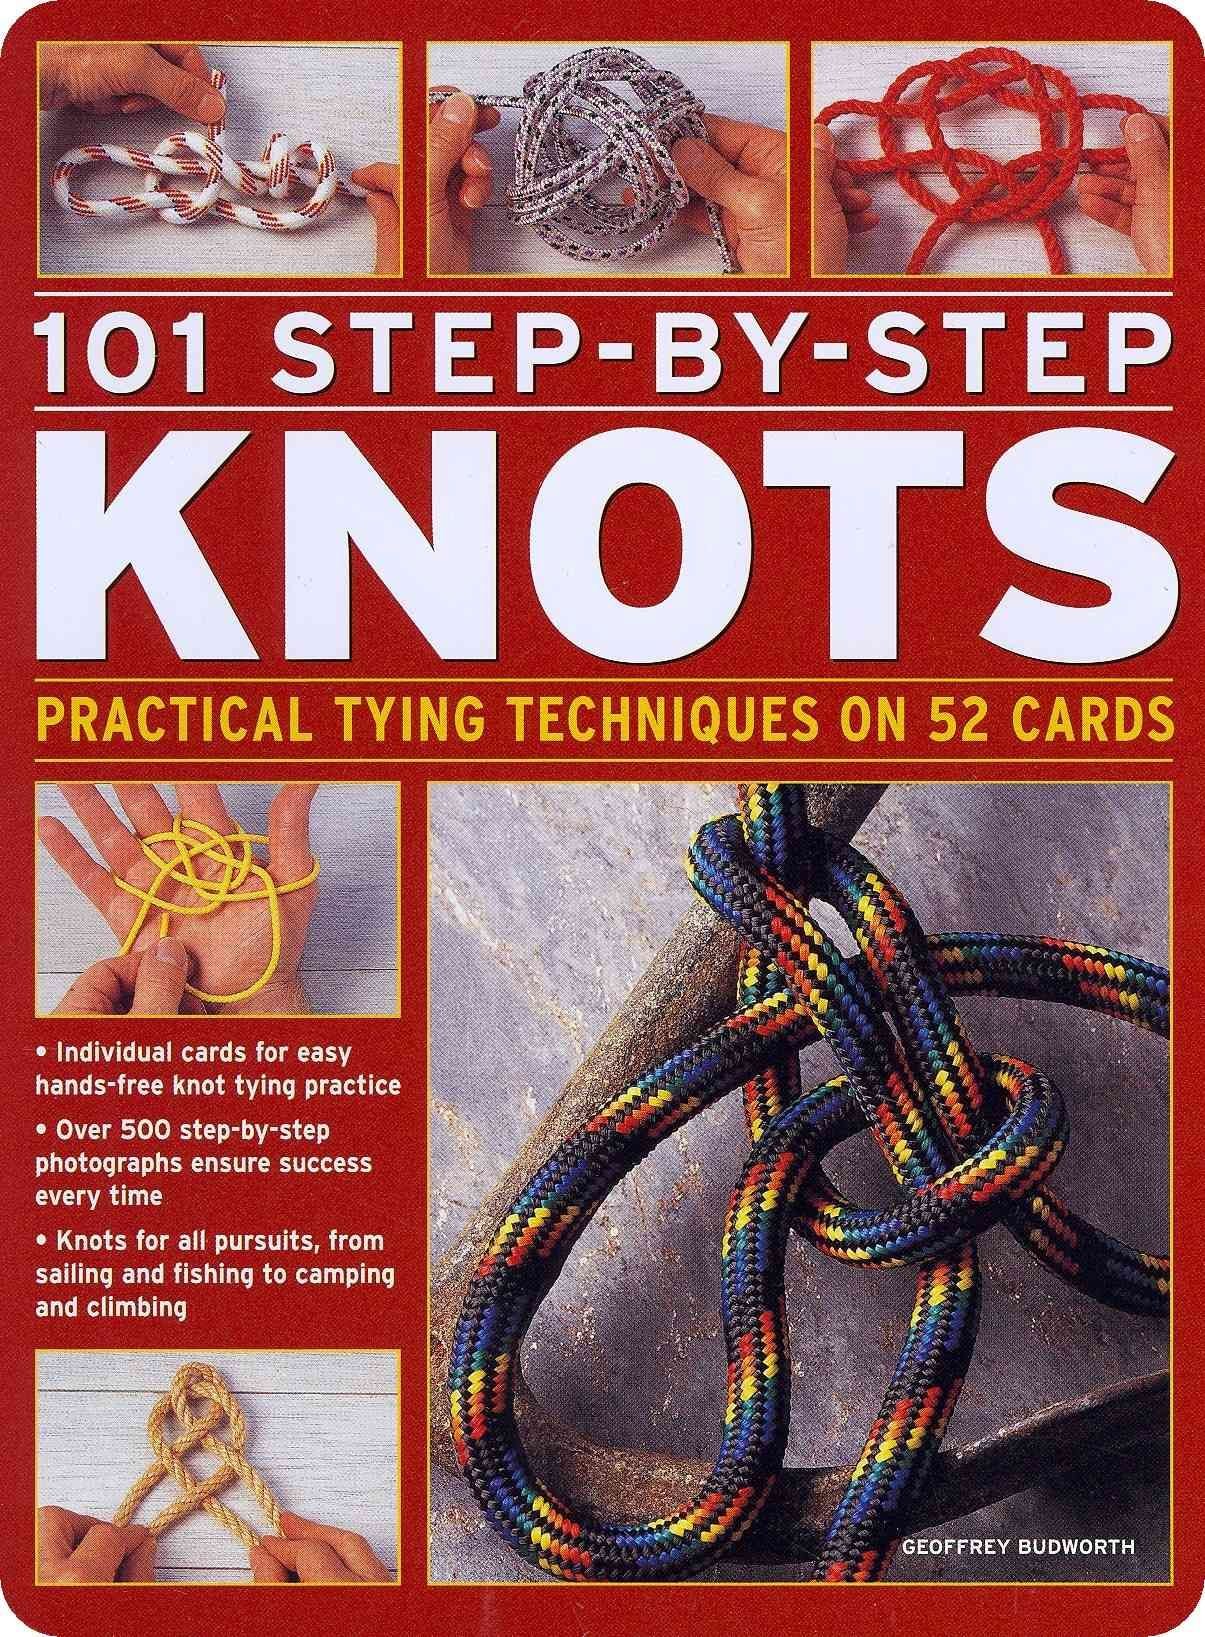 Buy 101 Step-by-Step Knots by Geoffrey Budworth With Free Delivery